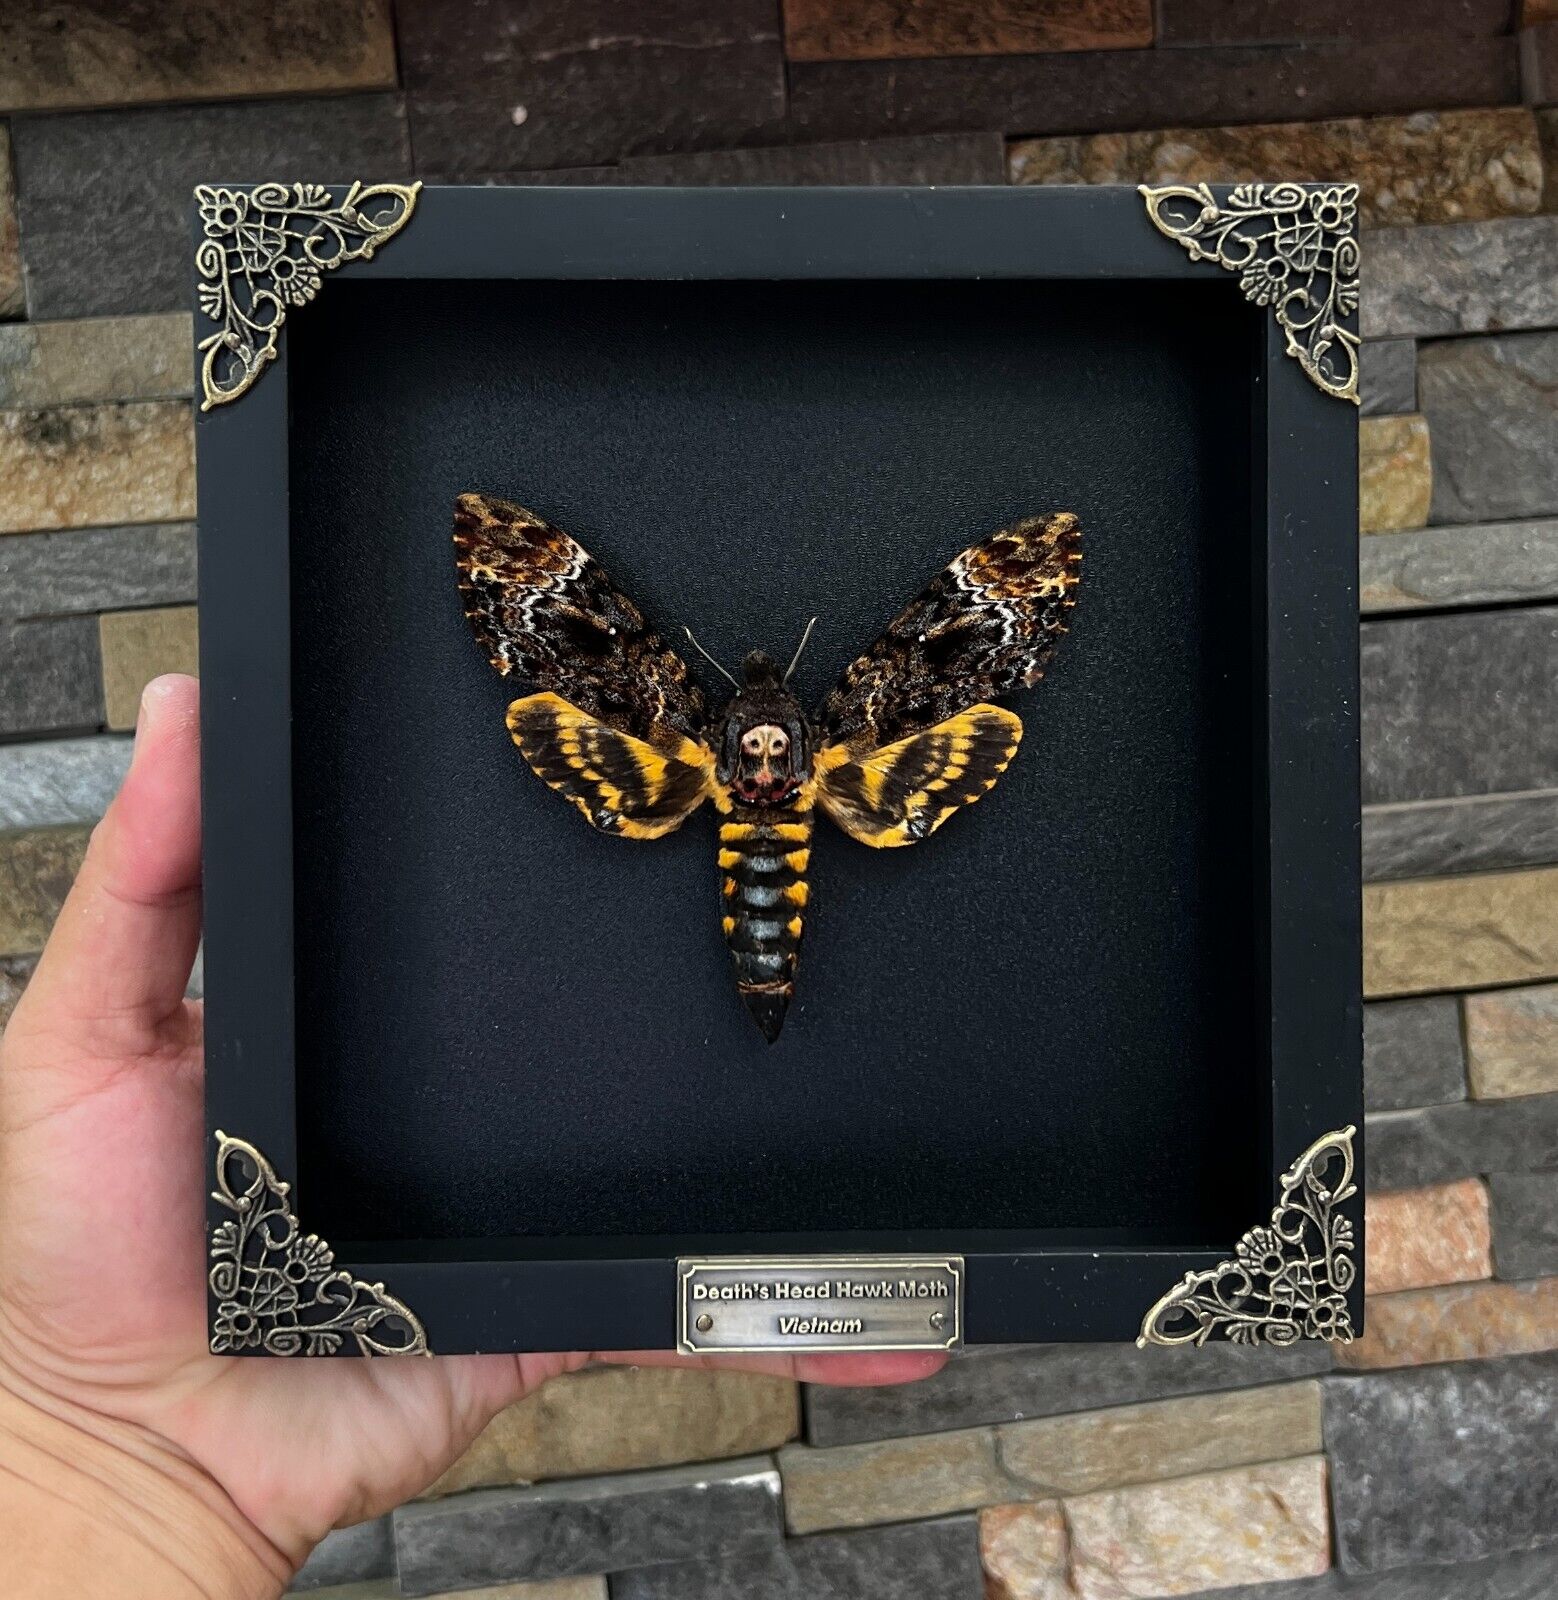 Real Insect Framed Death Head Moth Skull Acherontia Butterfly Oddities Taxidermy